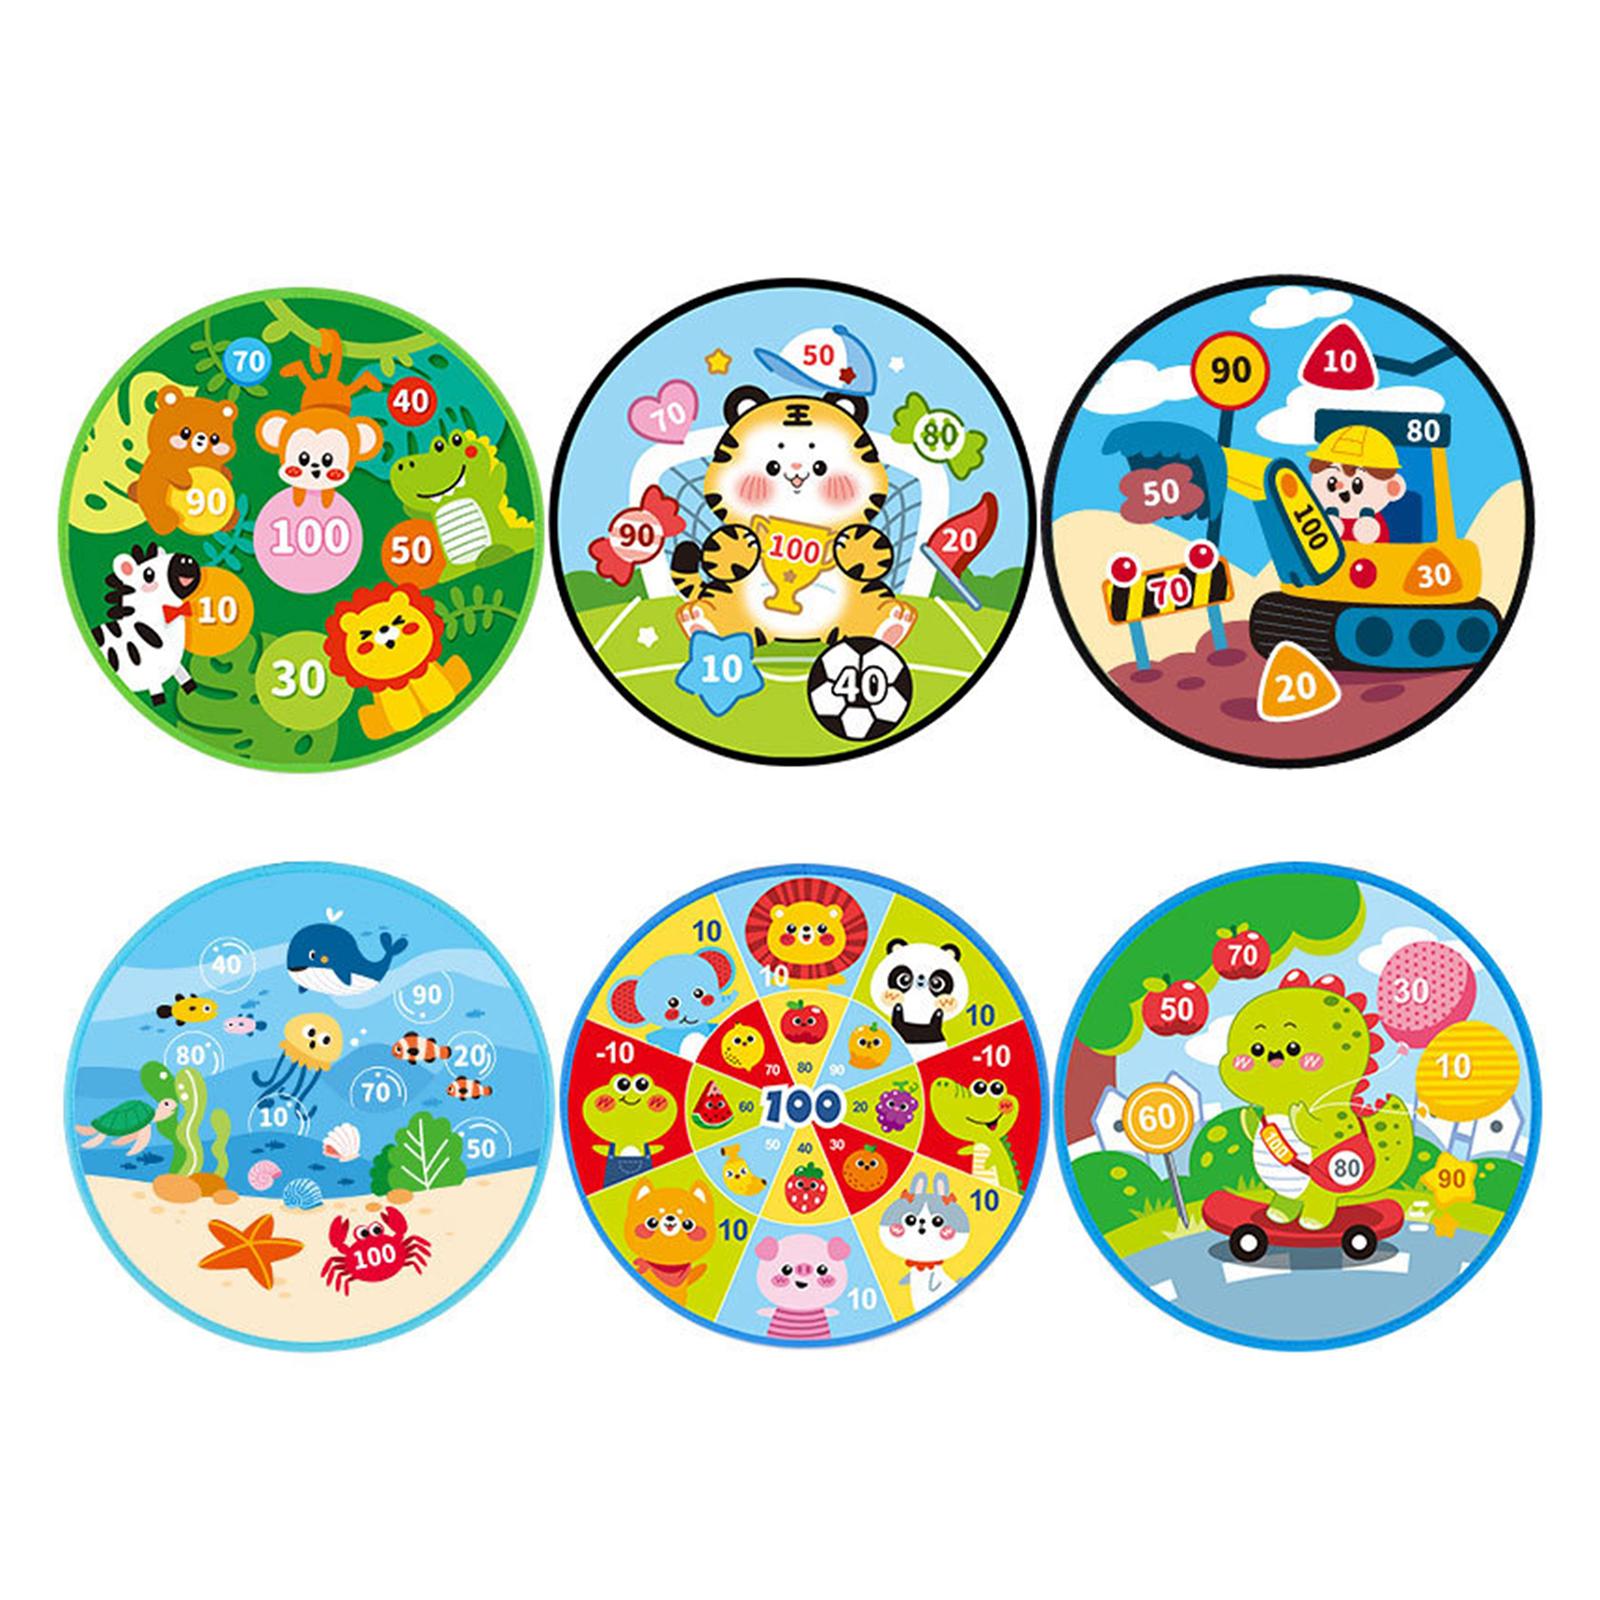 Cartoon board Toys Home Wall Mounted with 8 Sticky Balls Games fruit animals